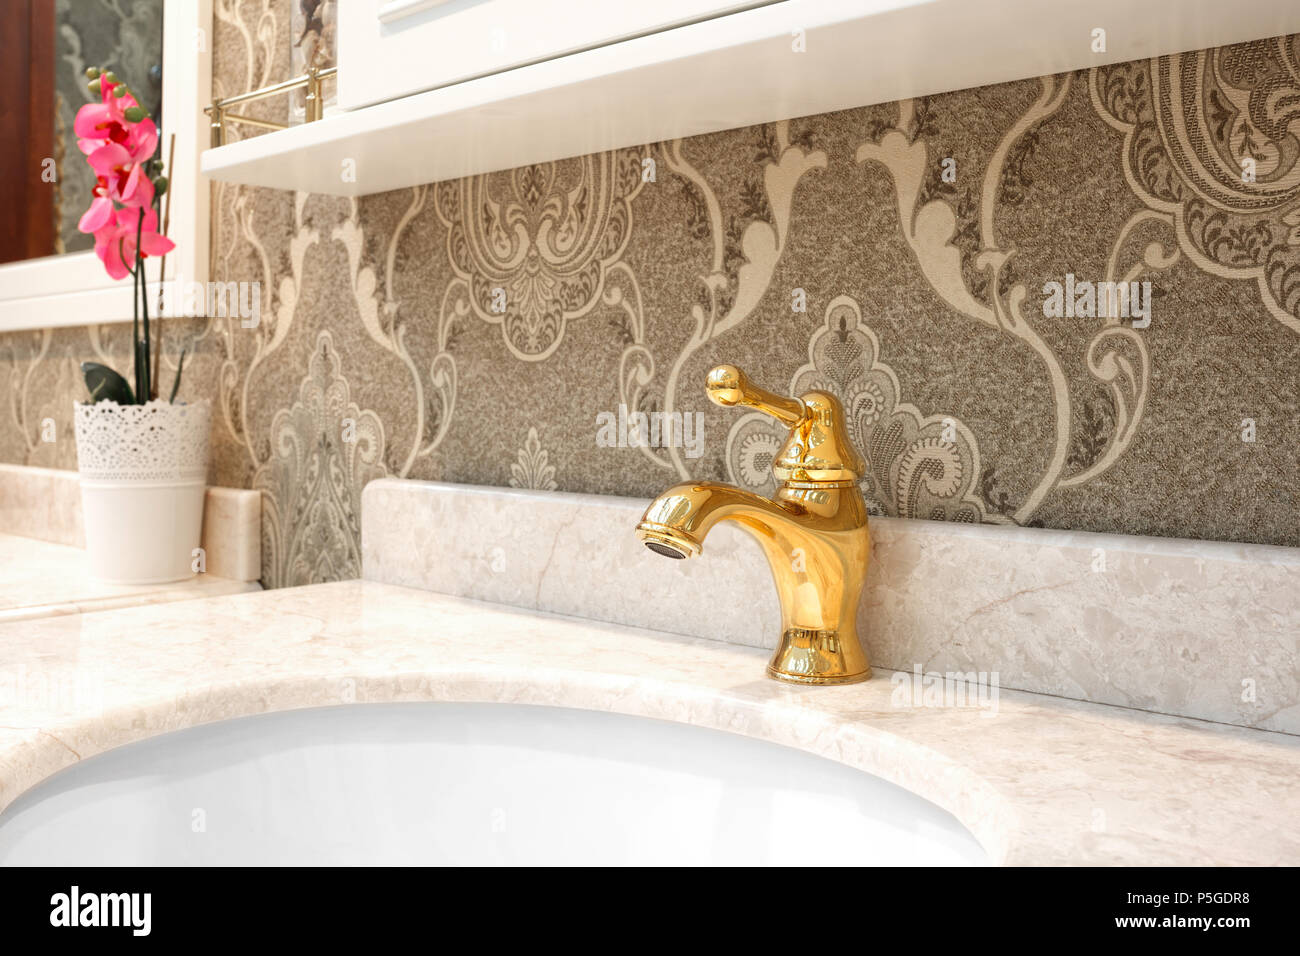 https://c8.alamy.com/comp/P5GDR8/bathroom-luxury-classic-interior-with-white-sink-and-classic-retro-style-golden-faucet-P5GDR8.jpg